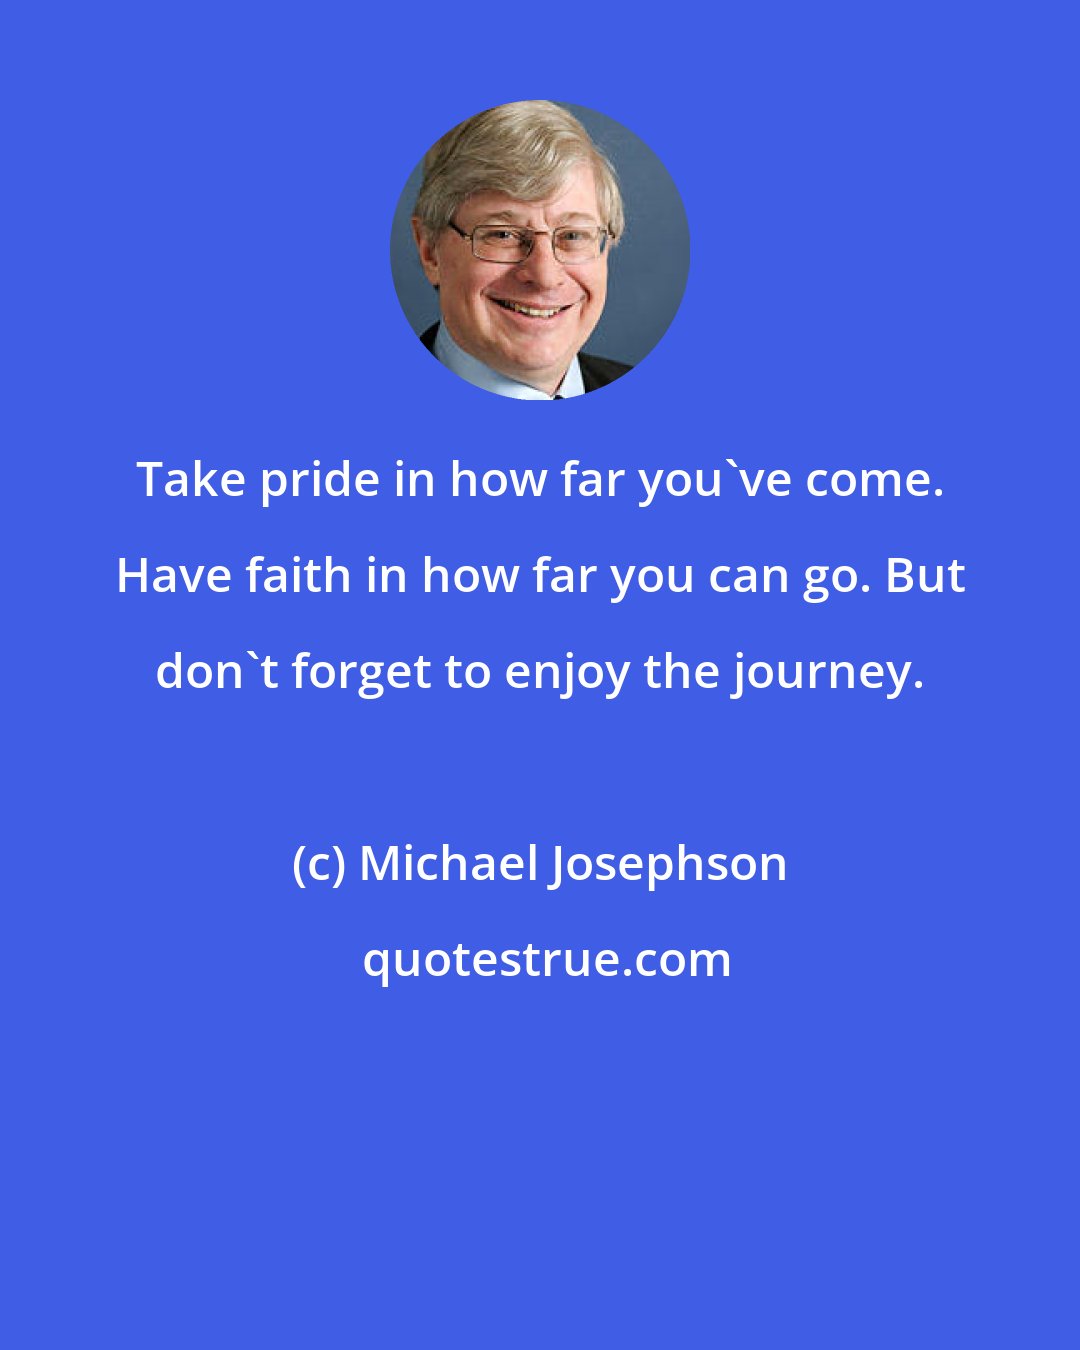 Michael Josephson: Take pride in how far you've come. Have faith in how far you can go. But don't forget to enjoy the journey.